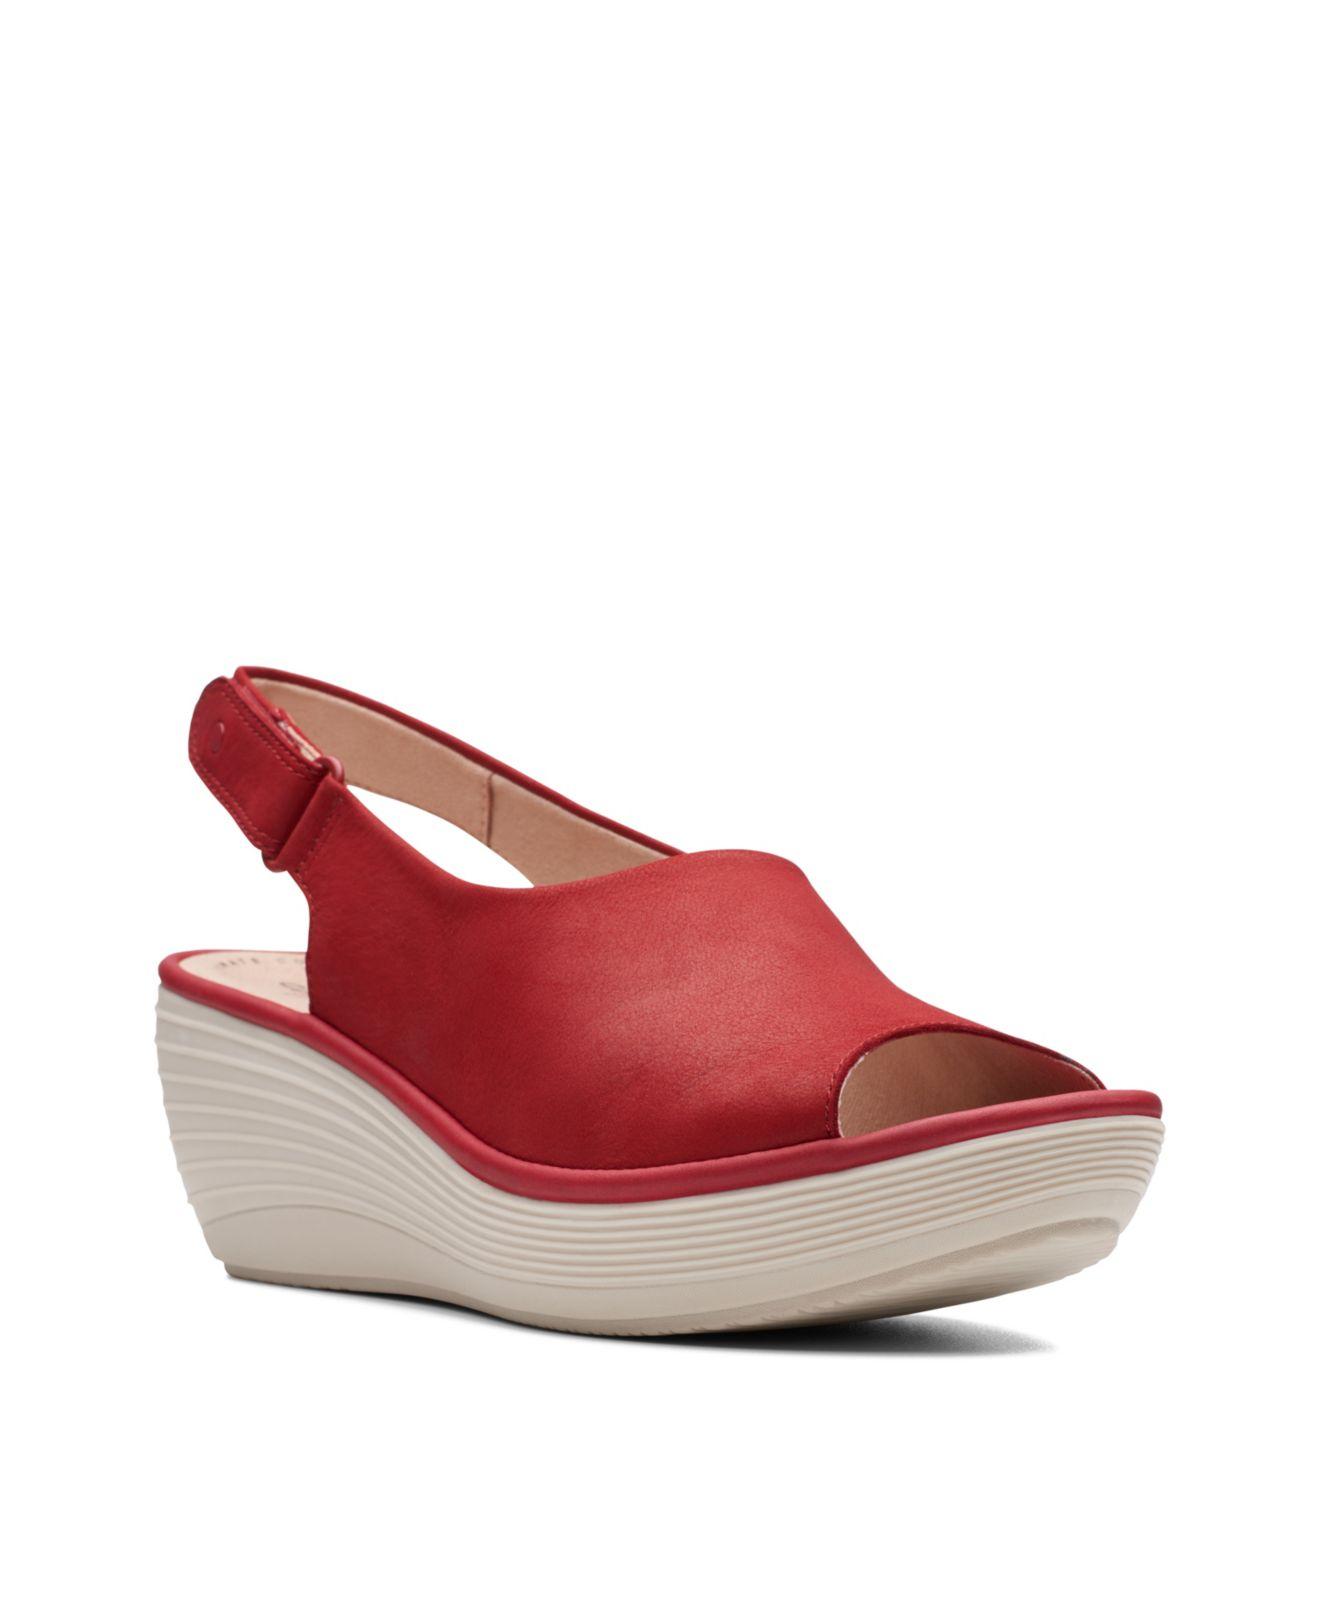 Clarks Reedly Shaina Wedge Sandal in Red Nubuck (Red) | Lyst